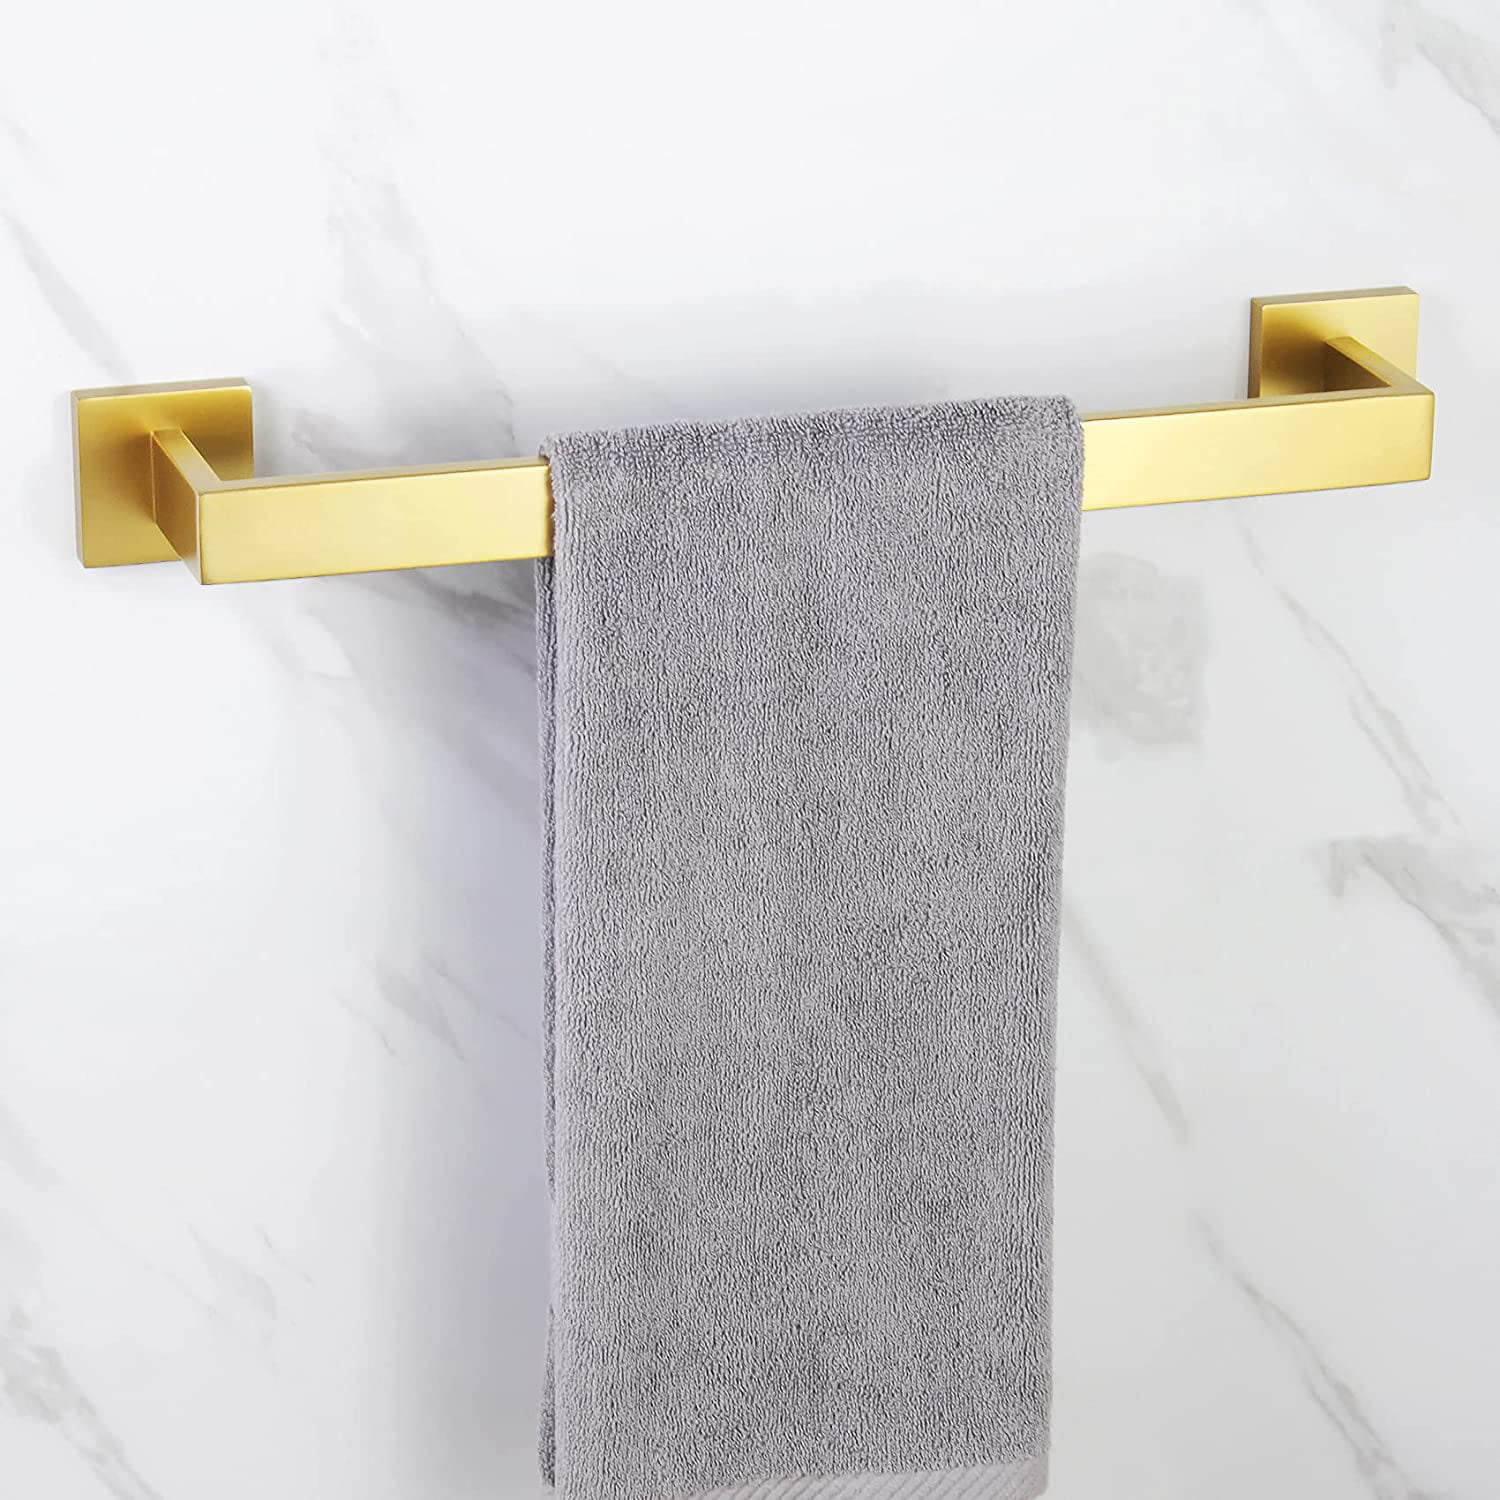 Details about   Wall Mount Towel Ring Holder Bathroom Bath Accessories Hanger Brass Gold Finish 